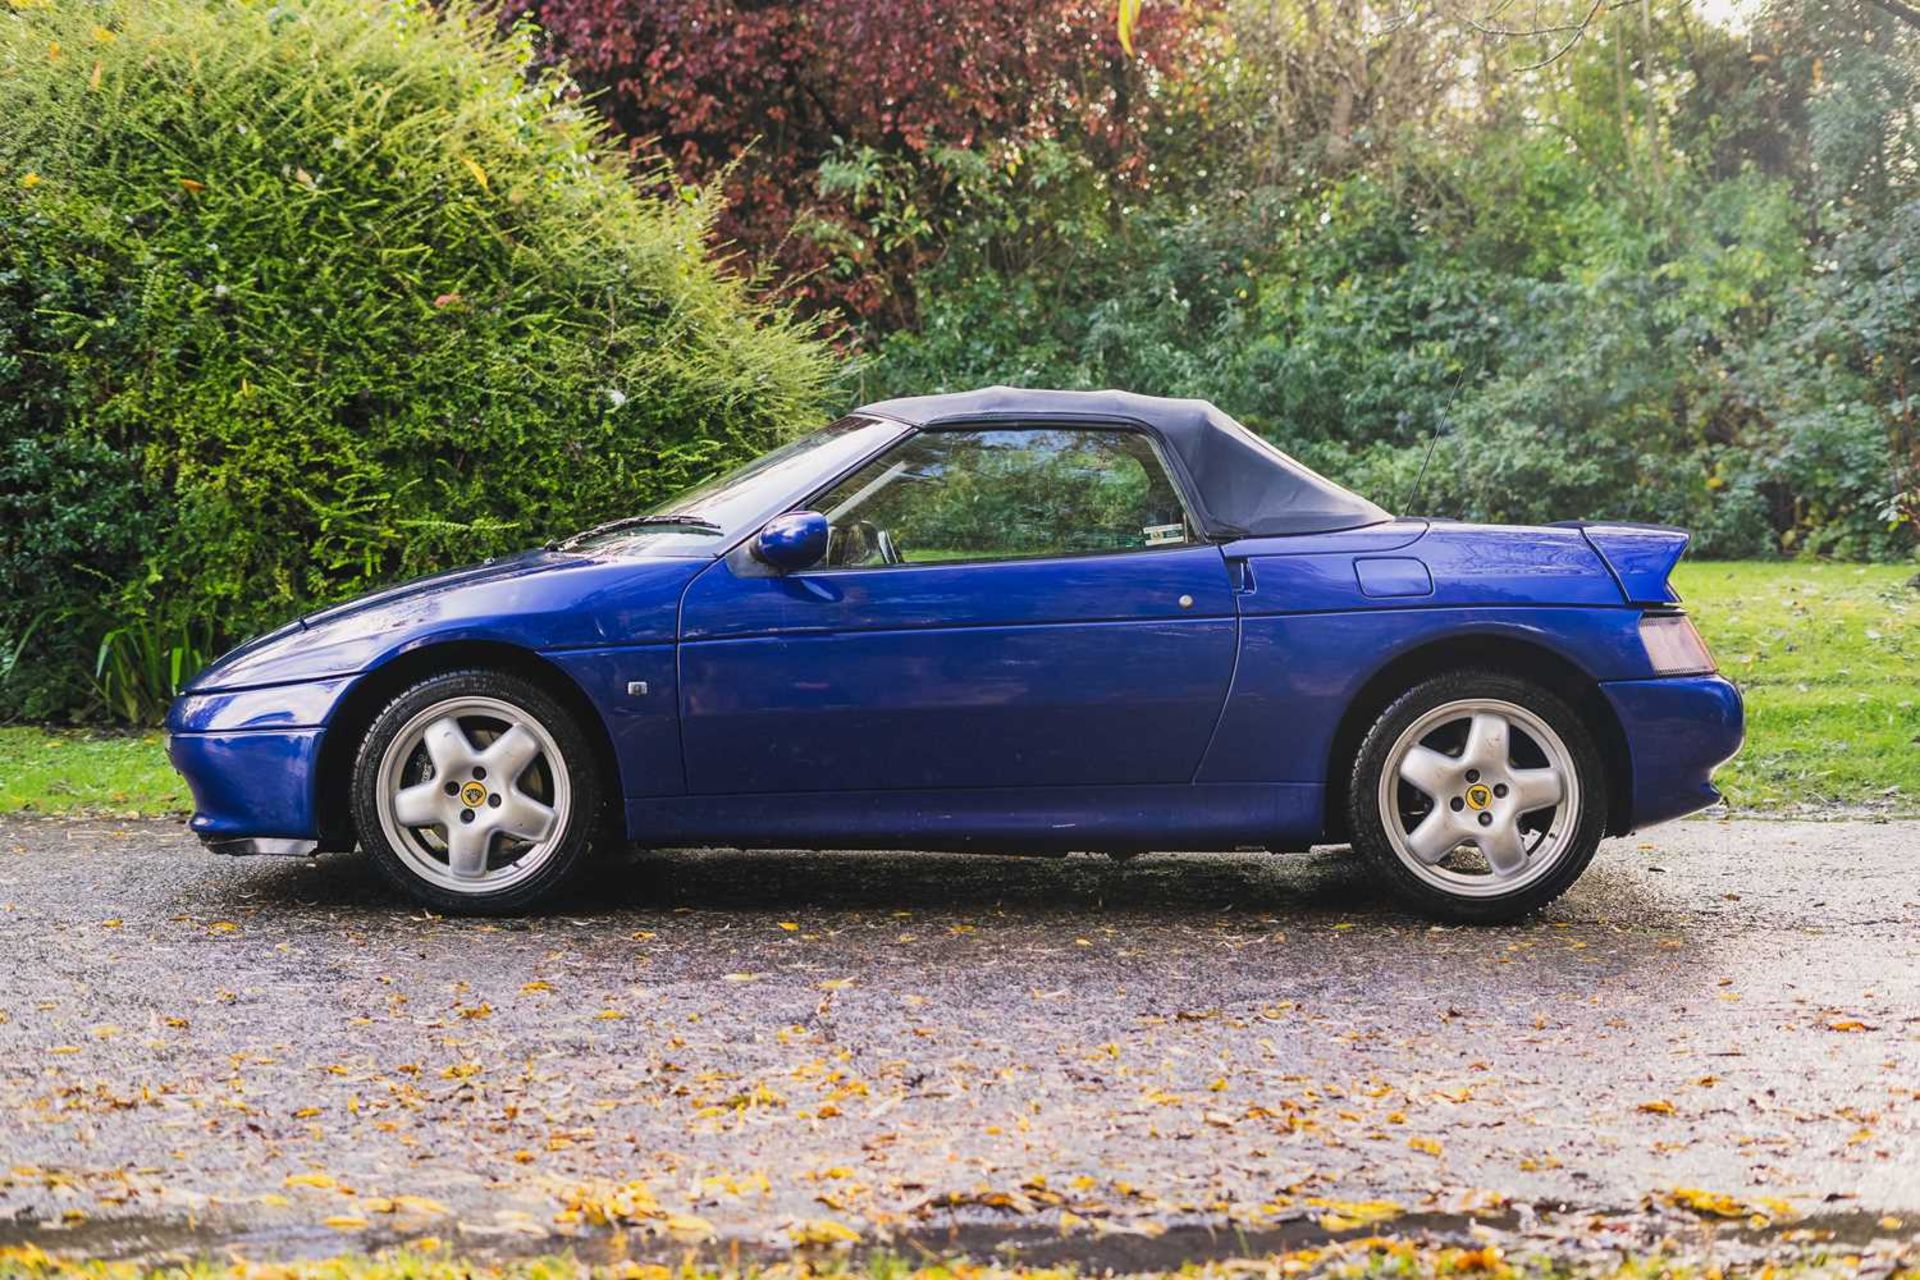 1995 Lotus Elan M100 S2 Turbo ***NO RESERVE*** Limited edition no. 673 of just 800 second series mod - Image 10 of 52